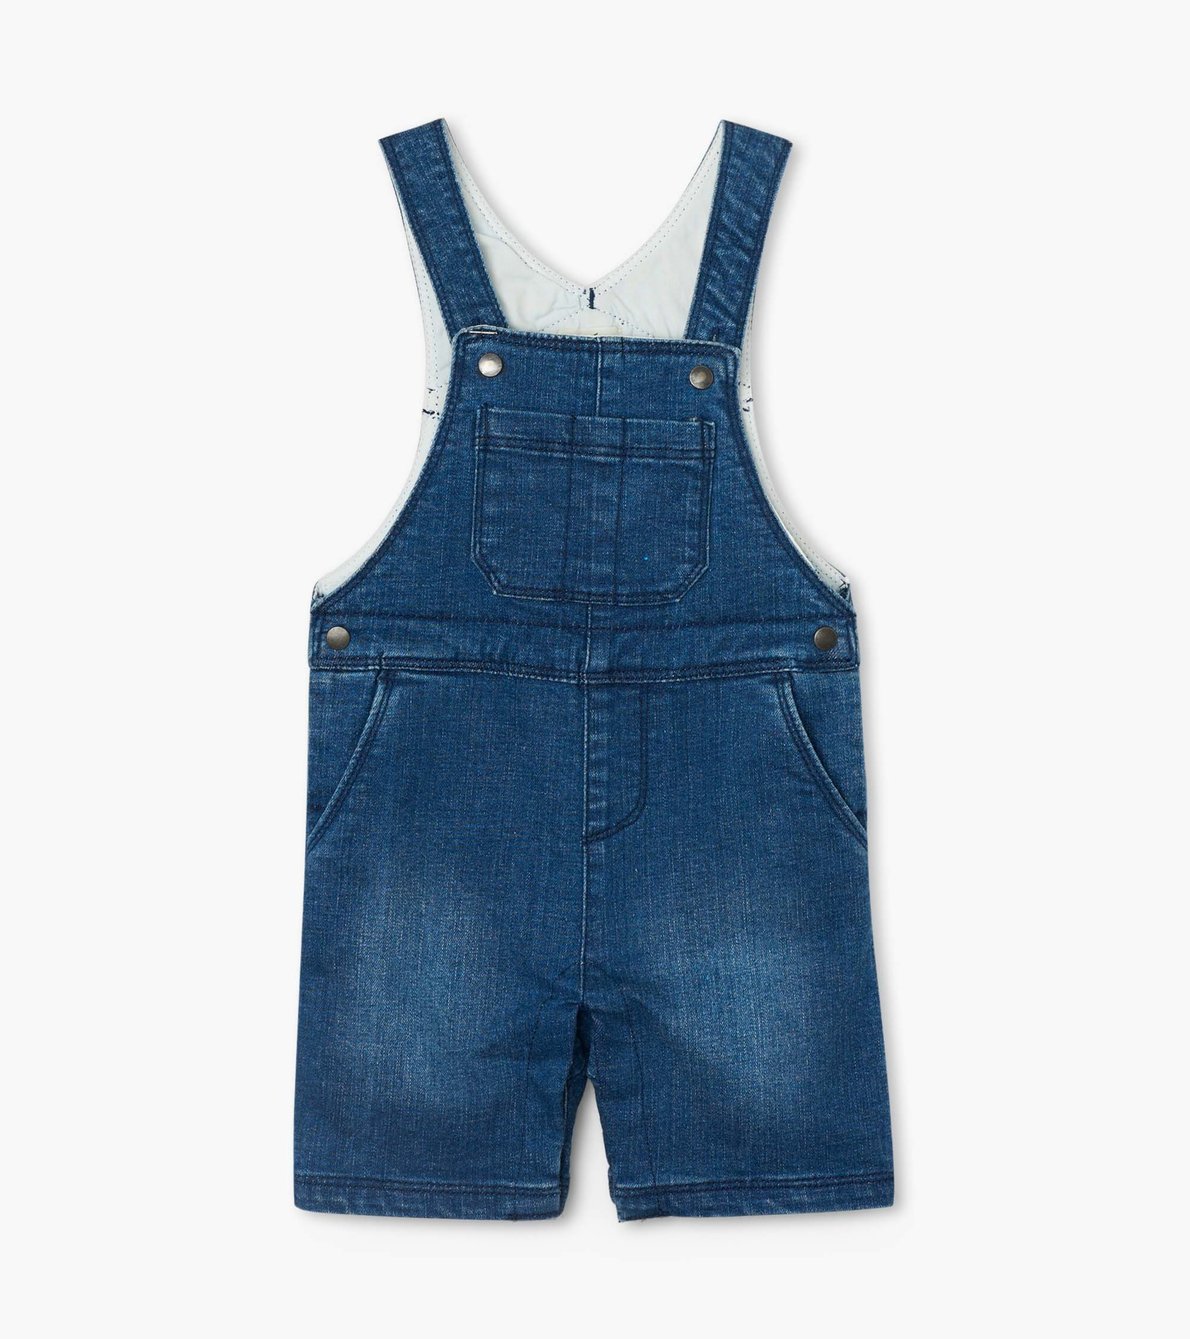 View larger image of Denim Baby Short Overalls